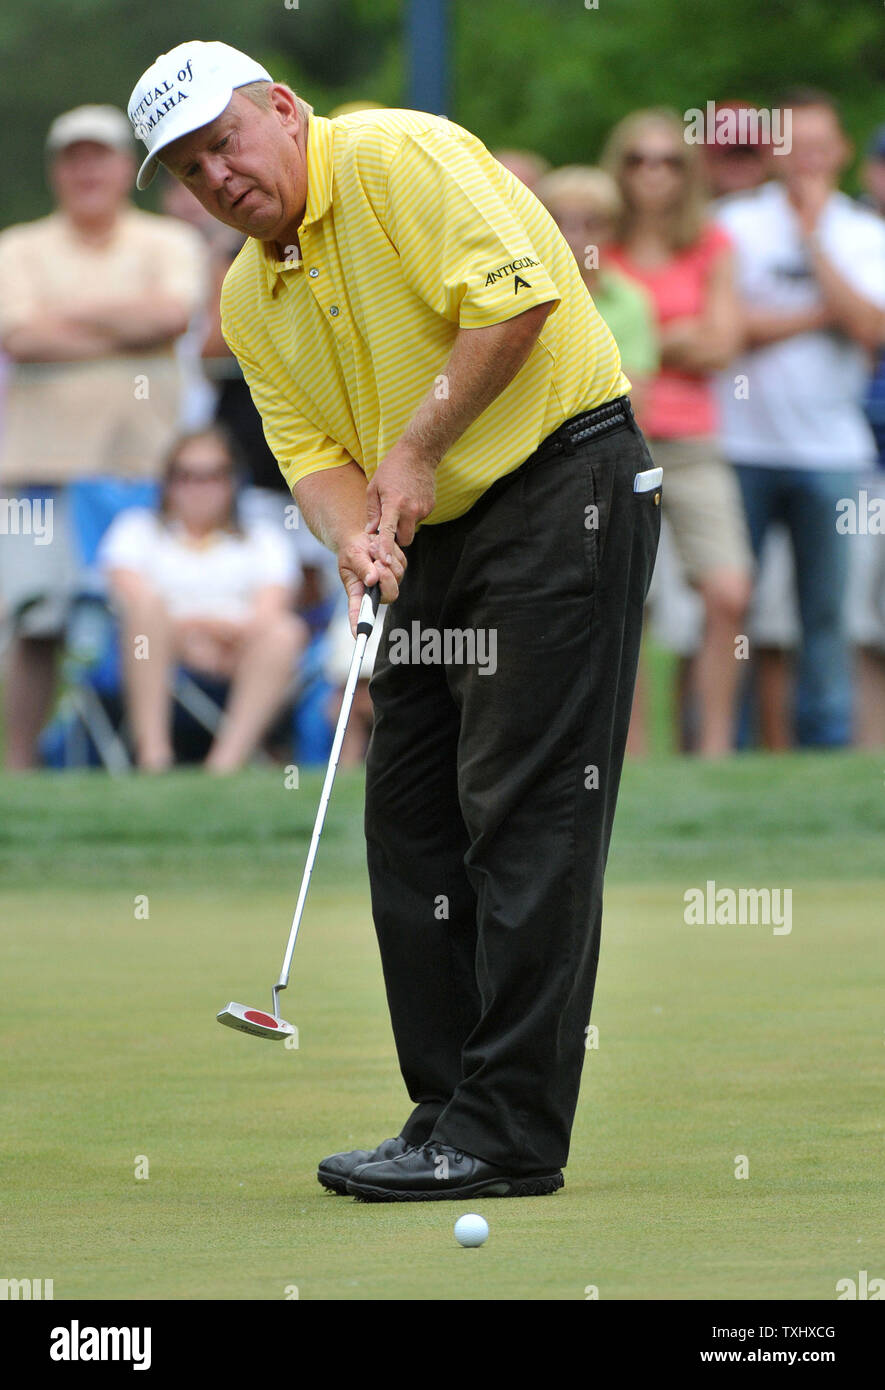 Billy Mayfair putts on the 6th green during the third round of the Quail Hollow Tournament in Charlotte, North Carolina on May 1, 2010.   UPI/Kevin Dietsch Stock Photo